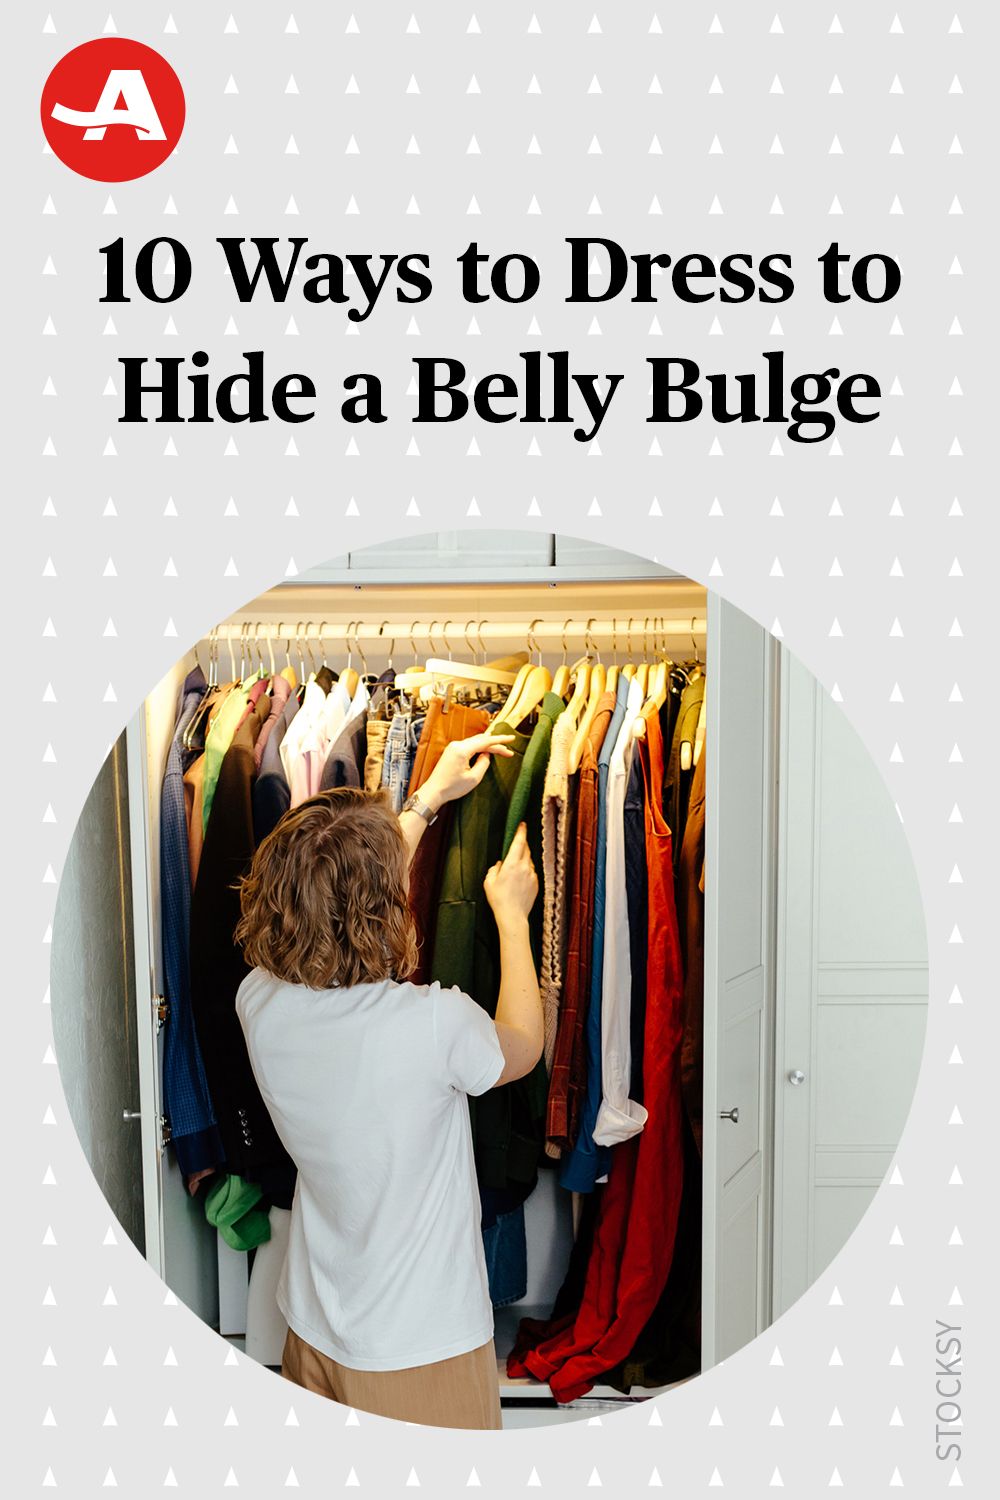 10 Ways to Dress to Hide a Belly Bulge